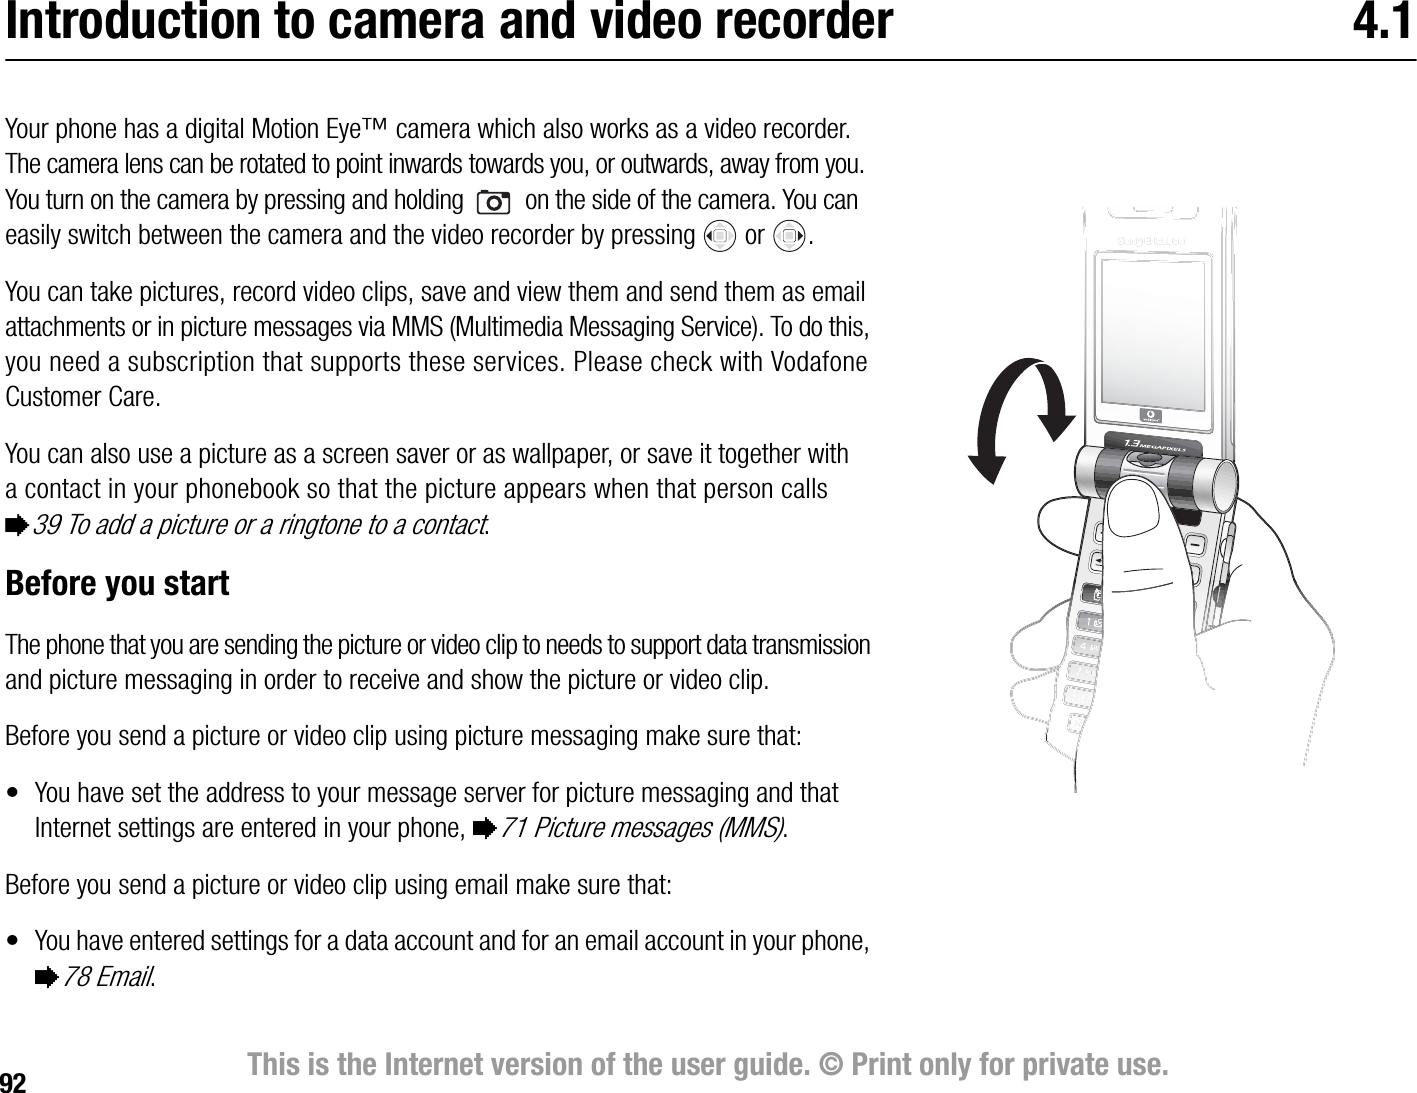 92 This is the Internet version of the user guide. © Print only for private use.Introduction to camera and video recorder 4.1Your phone has a digital Motion Eye™ camera which also works as a video recorder. The camera lens can be rotated to point inwards towards you, or outwards, away from you. You turn on the camera by pressing and holding   on the side of the camera. You can easily switch between the camera and the video recorder by pressing   or  .You can take pictures, record video clips, save and view them and send them as email attachments or in picture messages via MMS (Multimedia Messaging Service). To do this, you need a subscription that supports these services. Please check with Vodafone Customer Care.You can also use a picture as a screen saver or as wallpaper, or save it together with a contact in your phonebook so that the picture appears when that person calls %39 To add a picture or a ringtone to a contact.Before you startThe phone that you are sending the picture or video clip to needs to support data transmission and picture messaging in order to receive and show the picture or video clip.Before you send a picture or video clip using picture messaging make sure that:• You have set the address to your message server for picture messaging and that Internet settings are entered in your phone, %71 Picture messages (MMS).Before you send a picture or video clip using email make sure that:• You have entered settings for a data account and for an email account in your phone, %78 Email. 